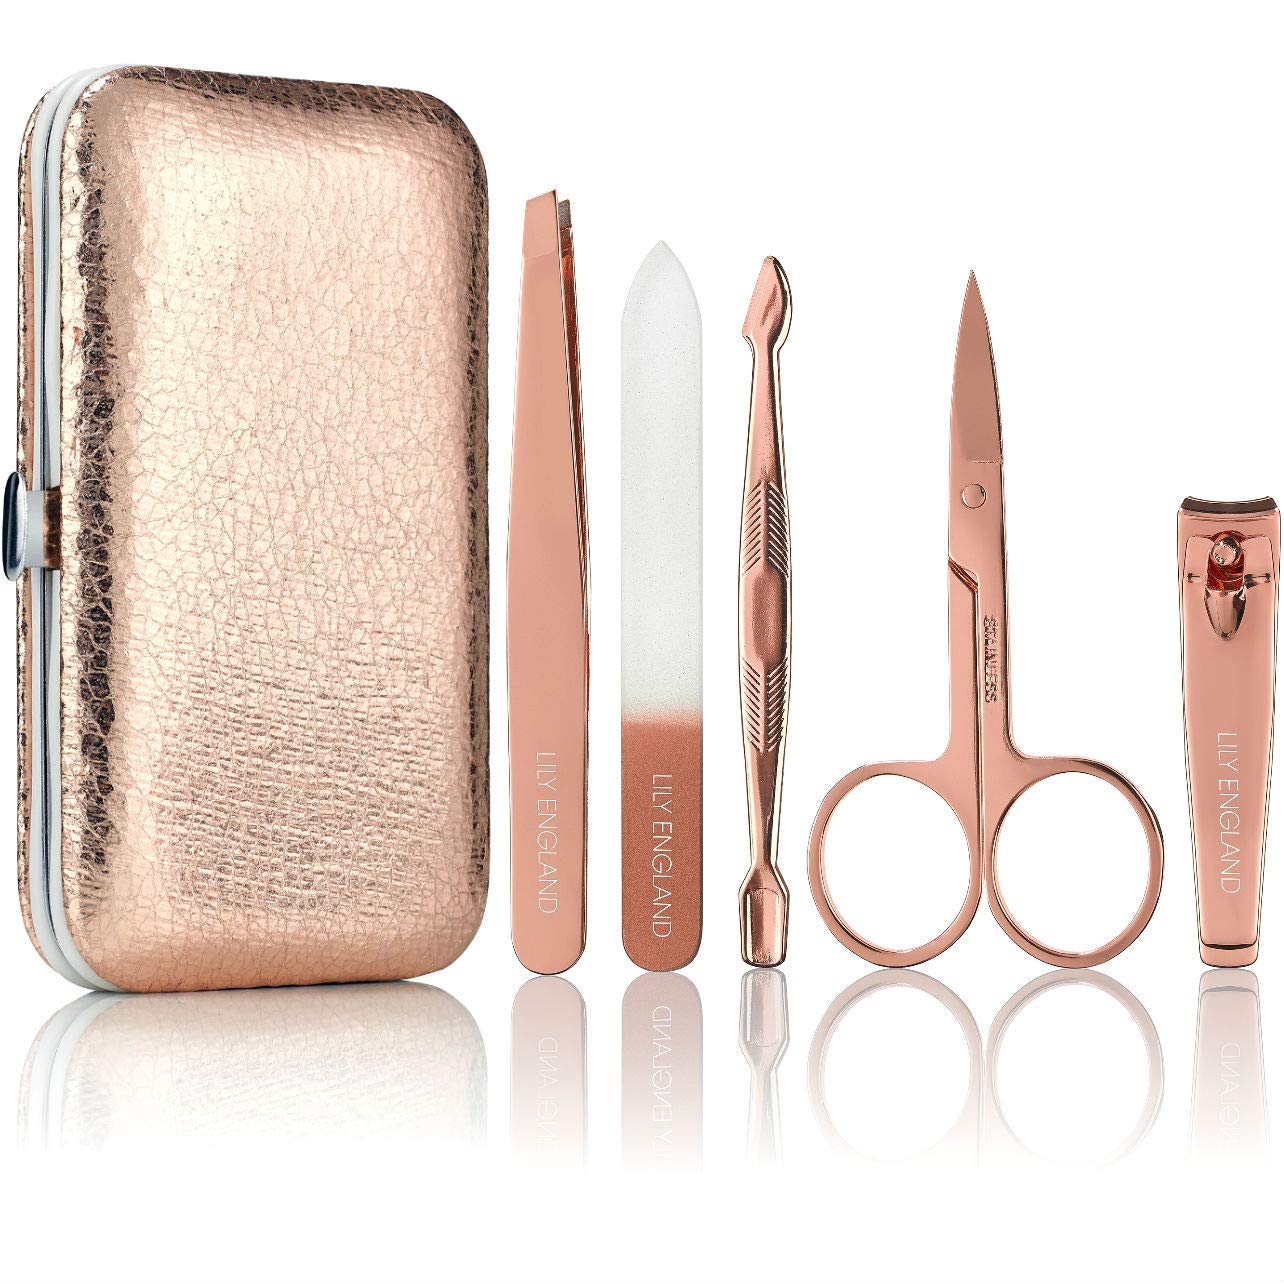 Manicure Set for Women & Girls - Professional Nail Tools & Pedicure Kit with Luxury Travel Case - Rose Gold by Lily England